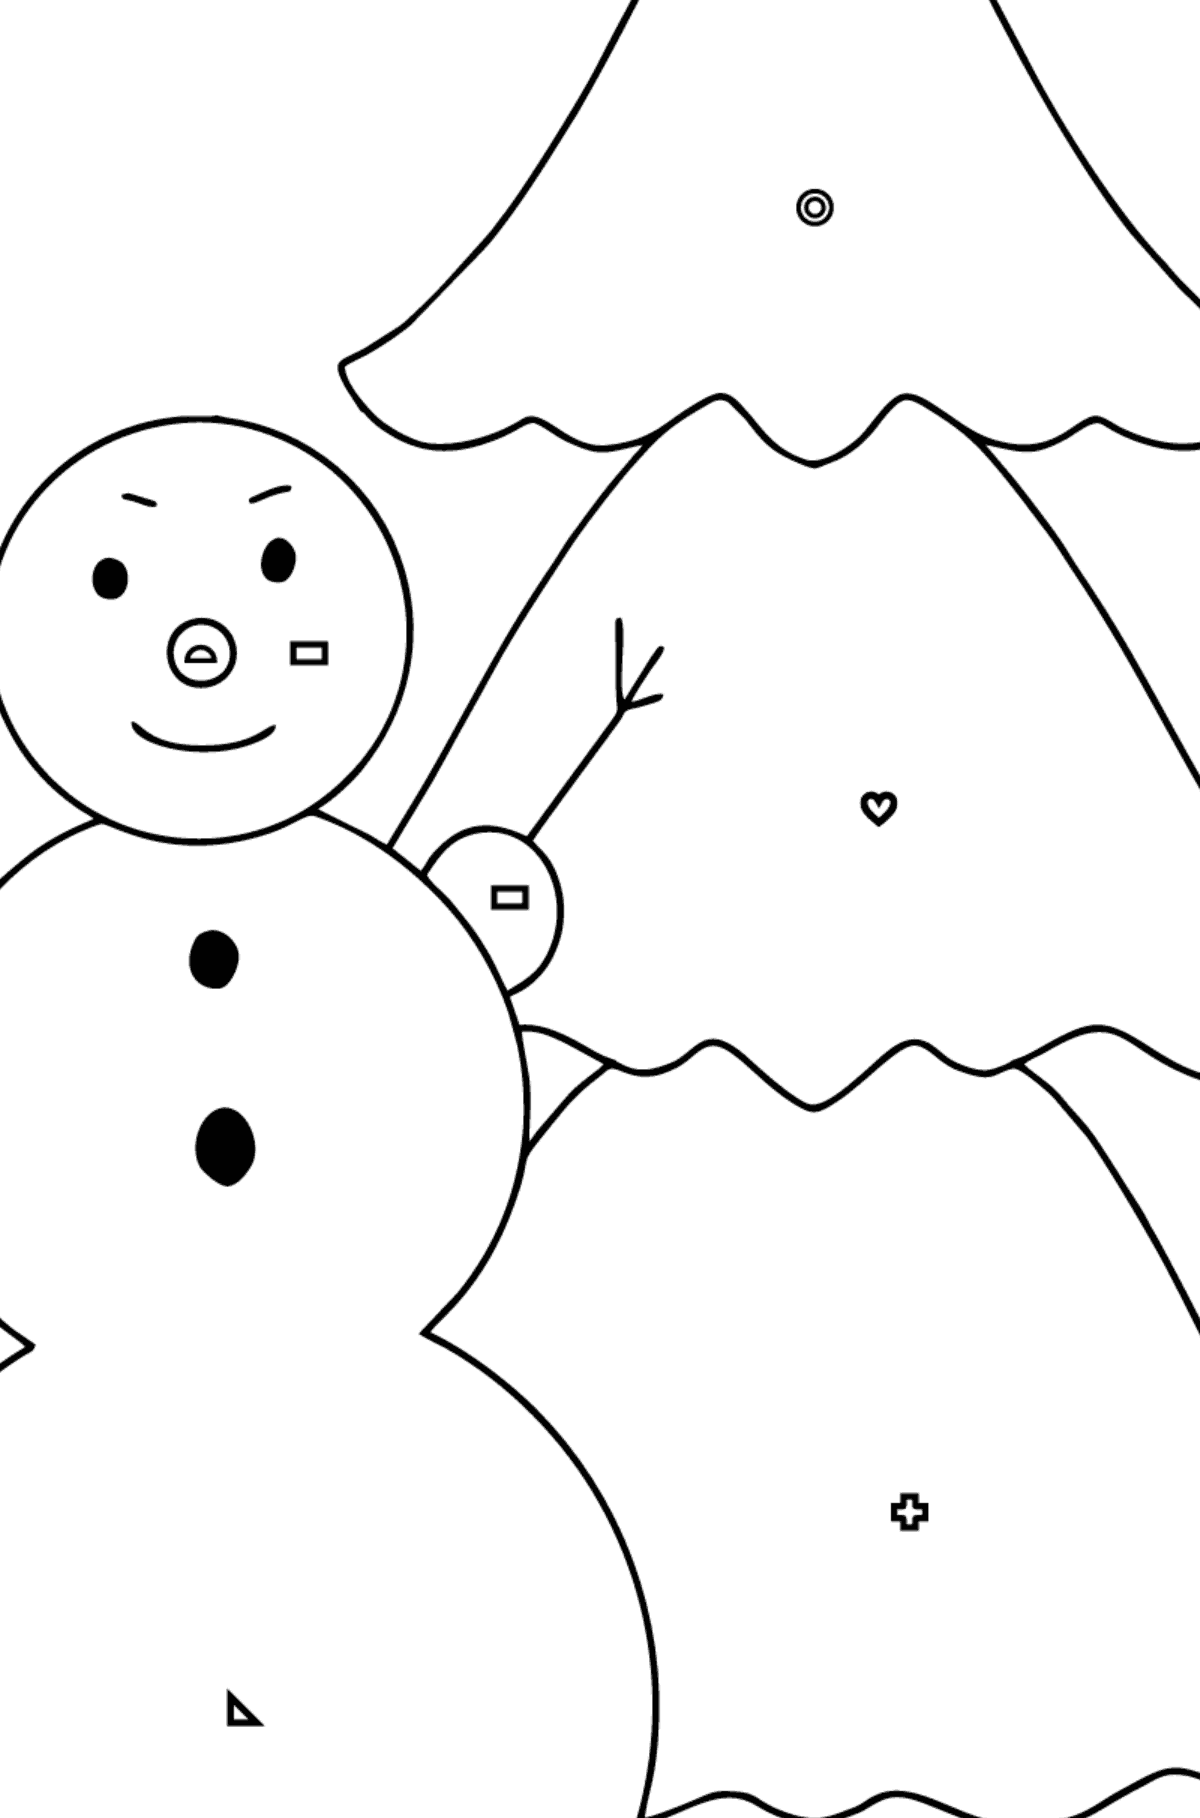 Snowman coloring page for kids - Coloring by Geometric Shapes for Kids